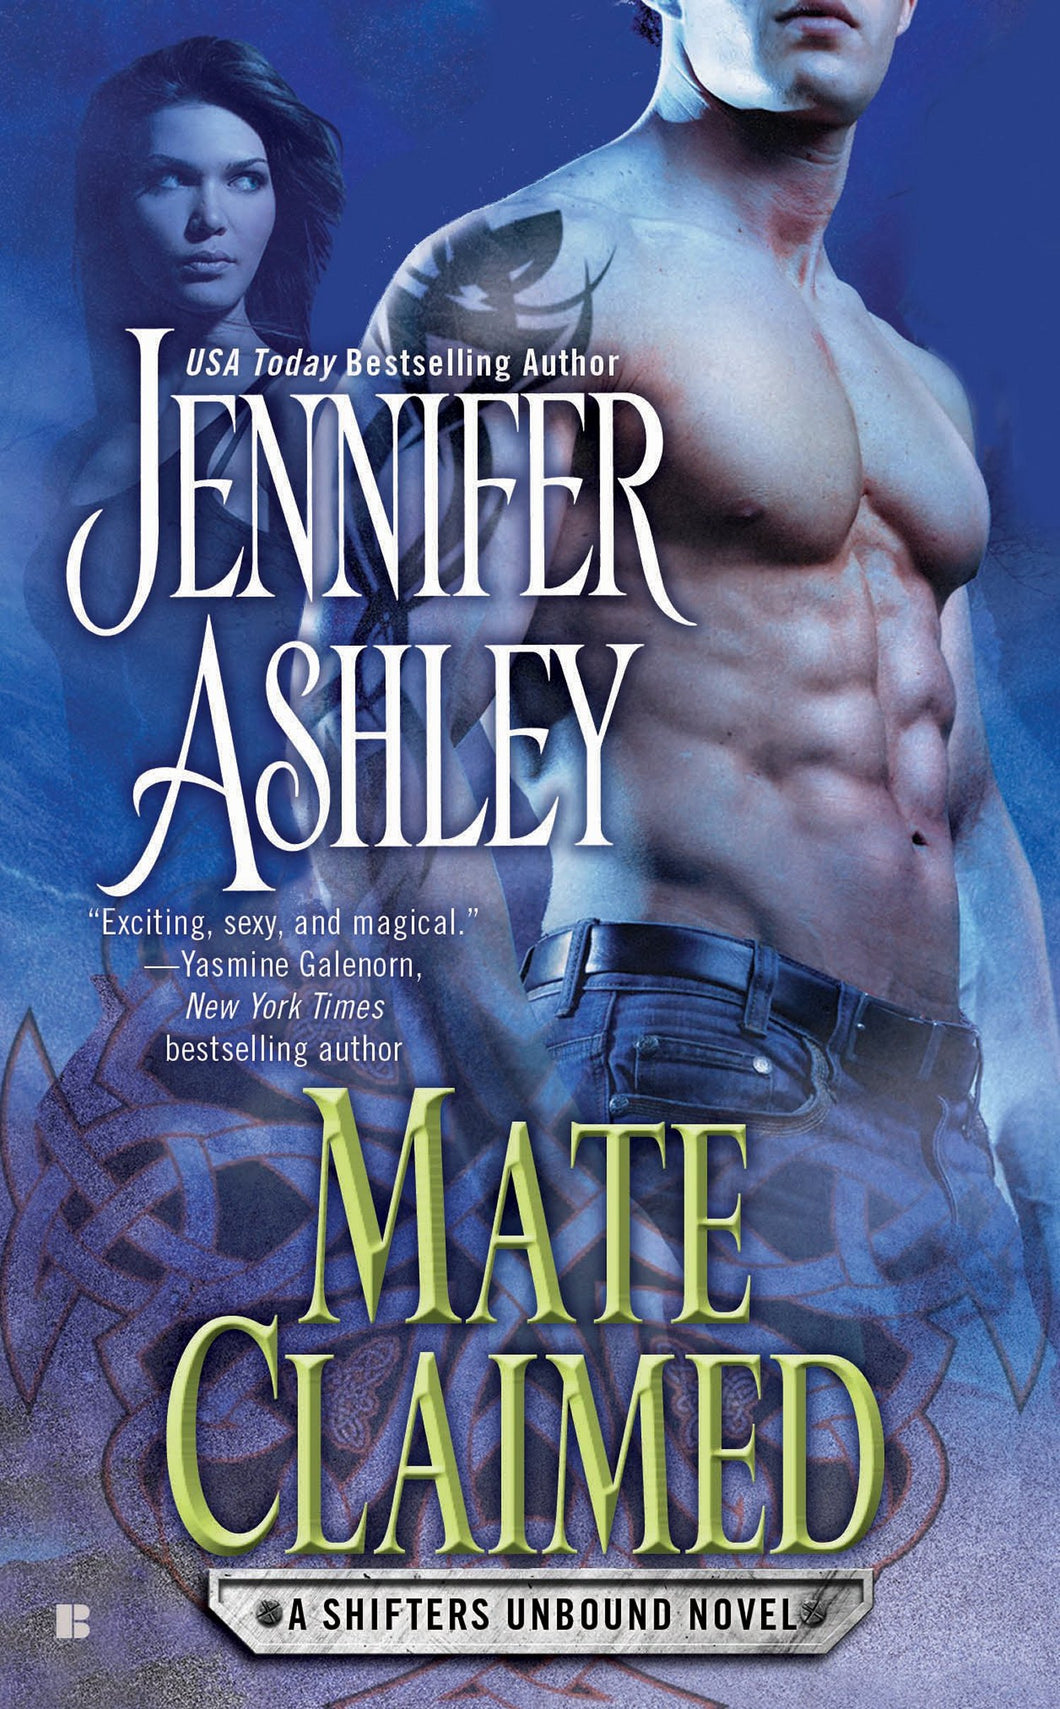 Mate Claimed (Shifters Unbound Book 4)